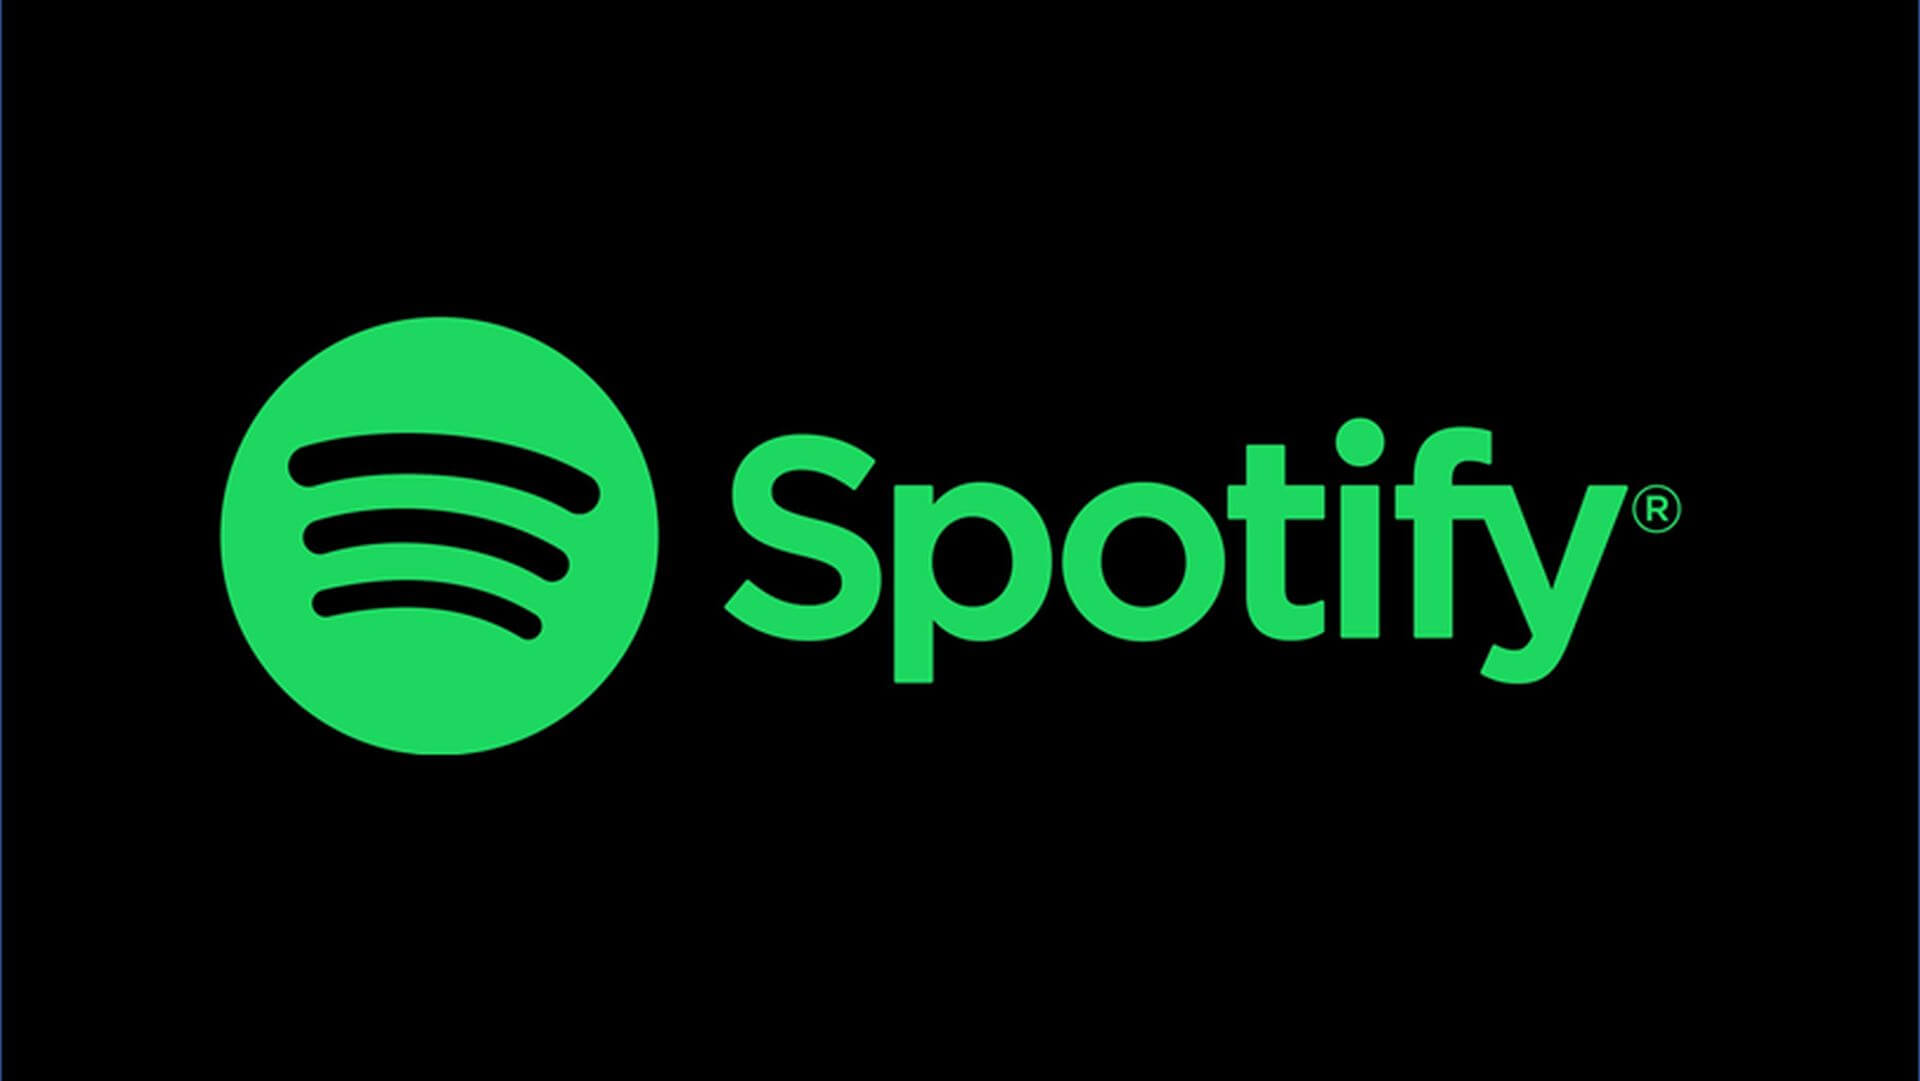 Can I play Spotify in my business premises?